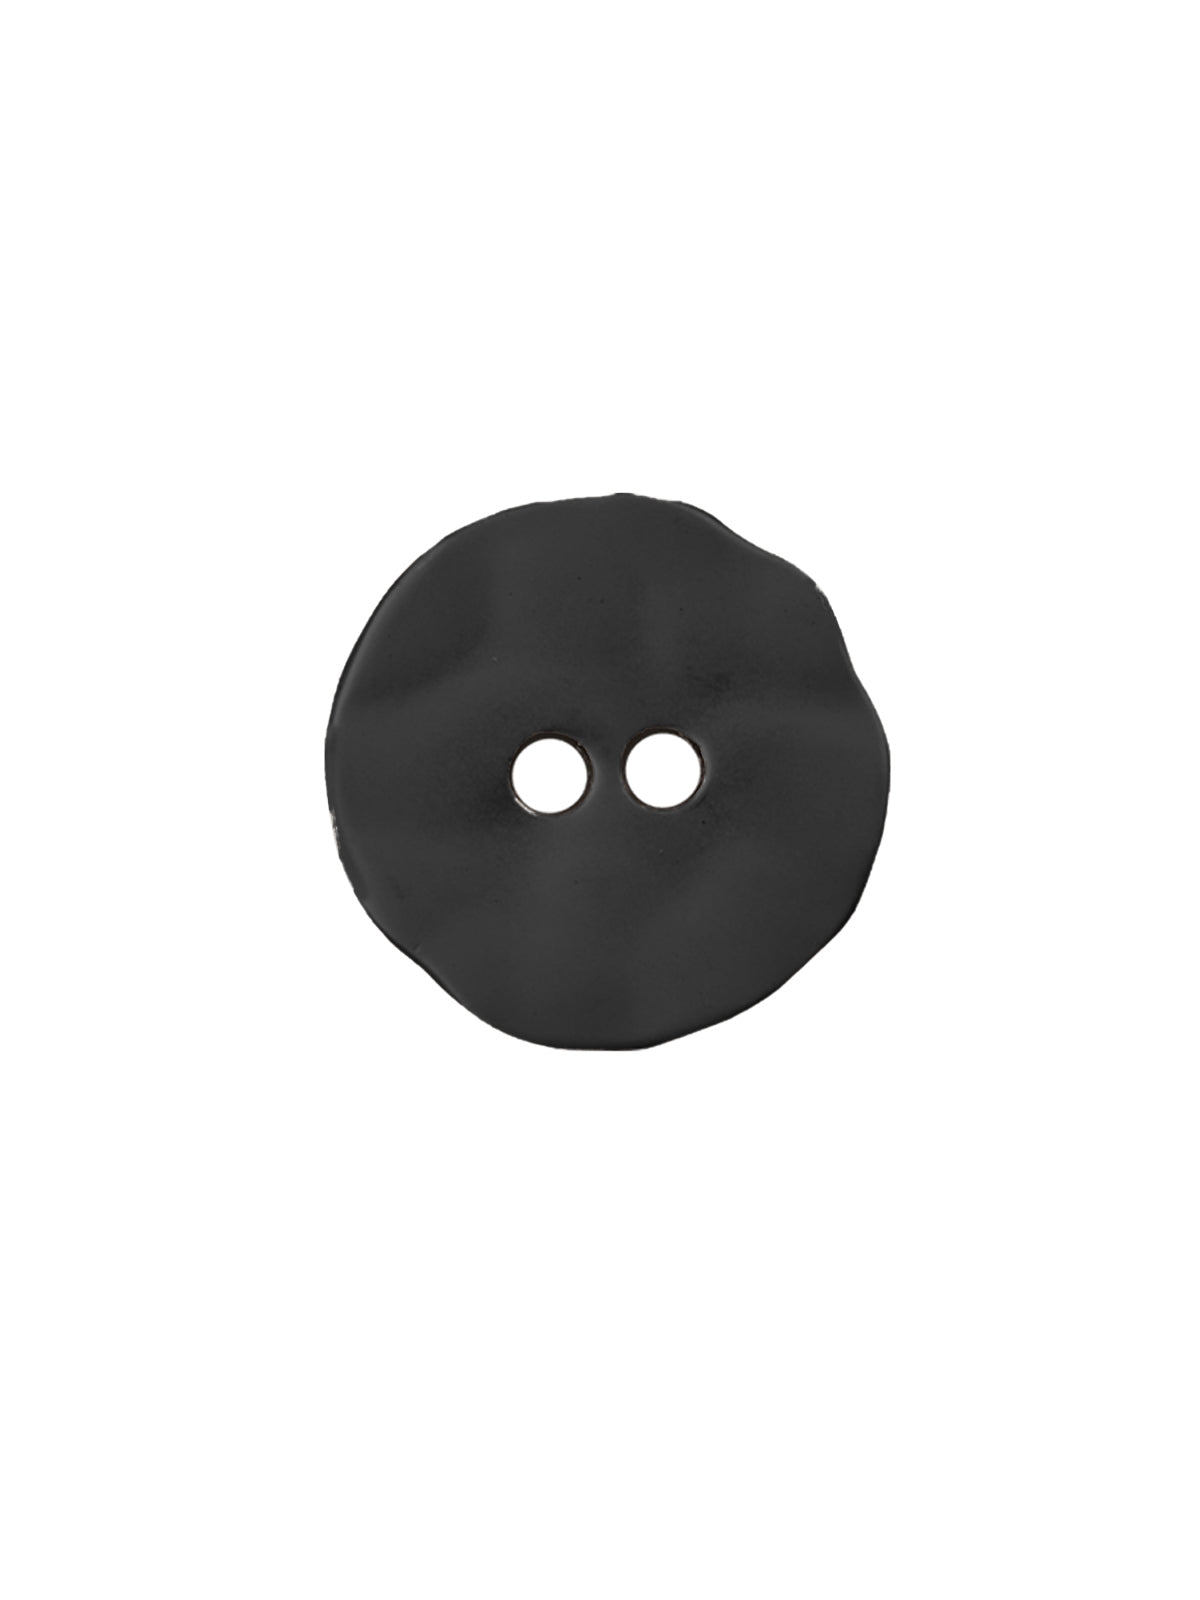 Round Shape with Uneven Edges Matte Metal Buttons